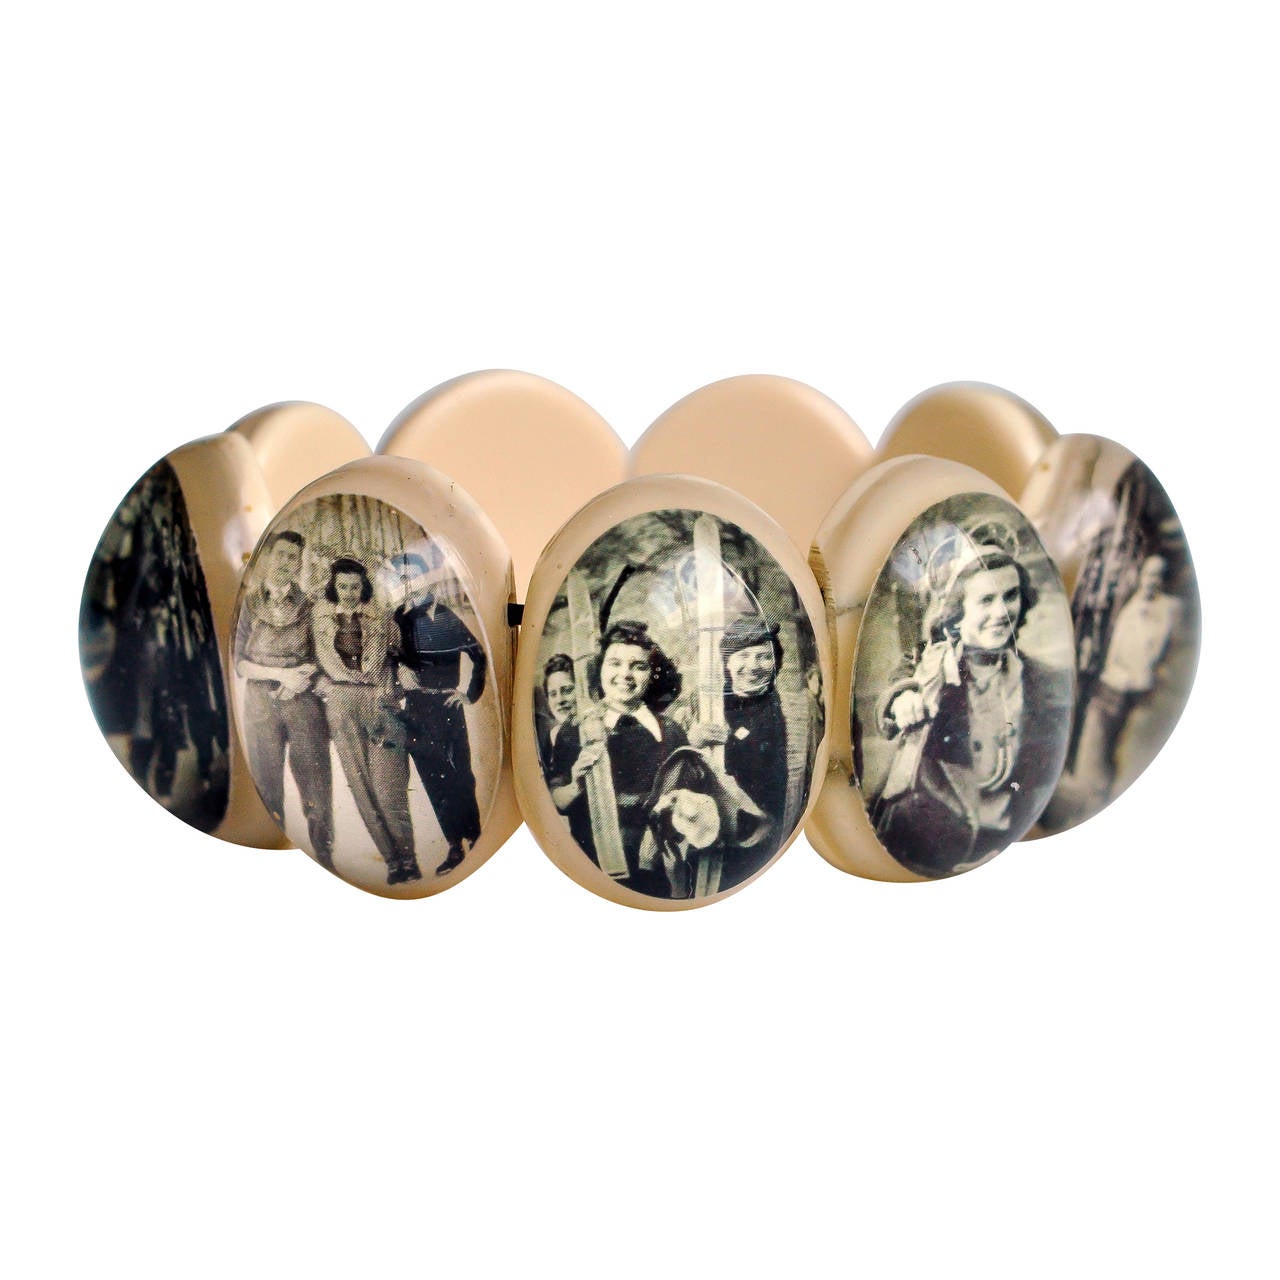 Early Link Bracelet by Donatella Pellini with Vintage Photos